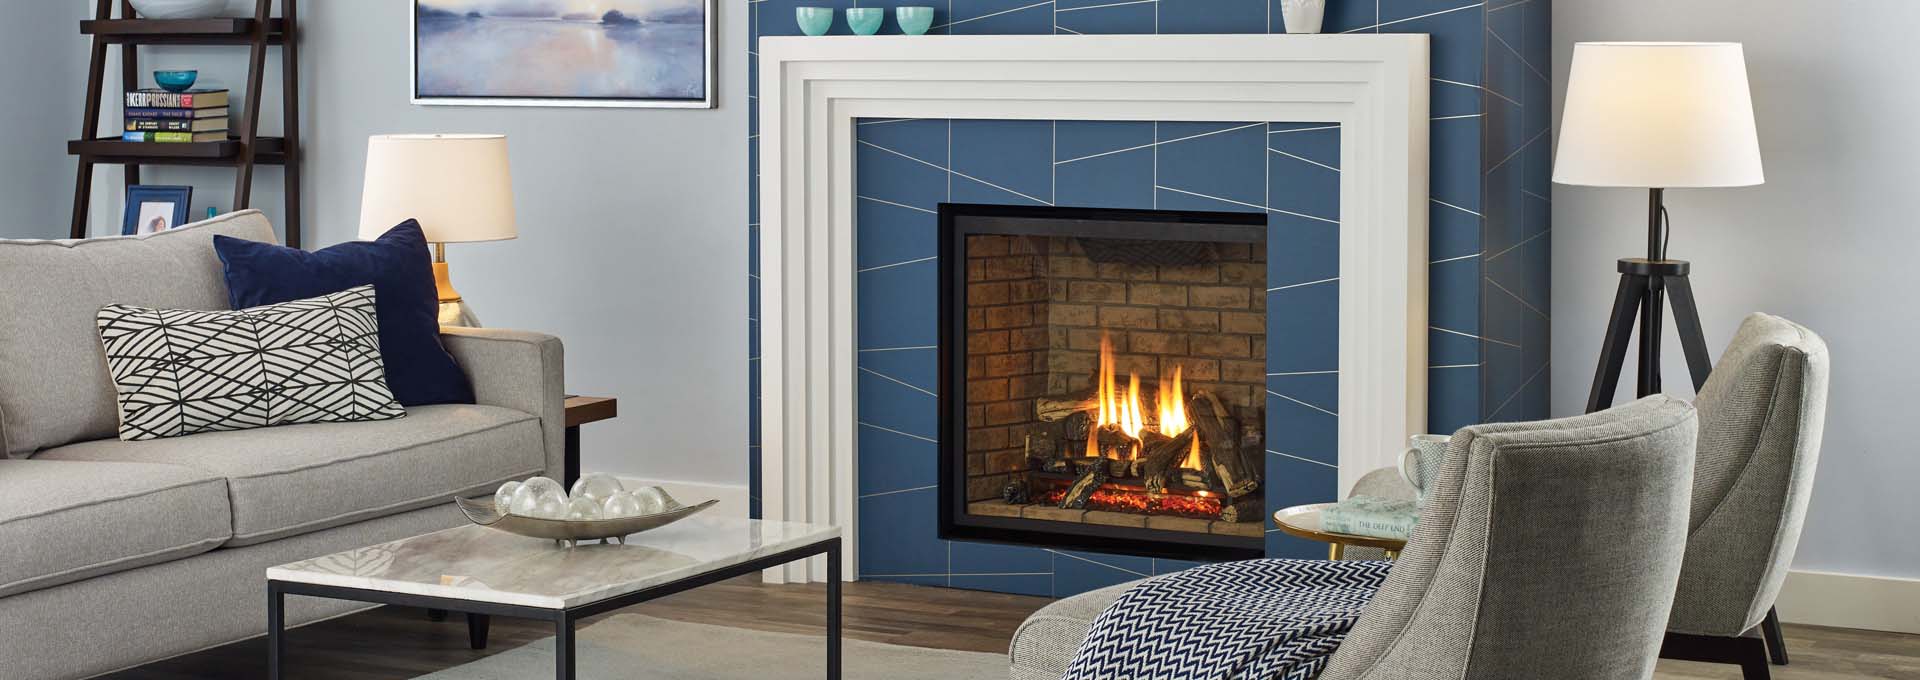 11 Reasons to Add a Gas Fireplace to Your Home 